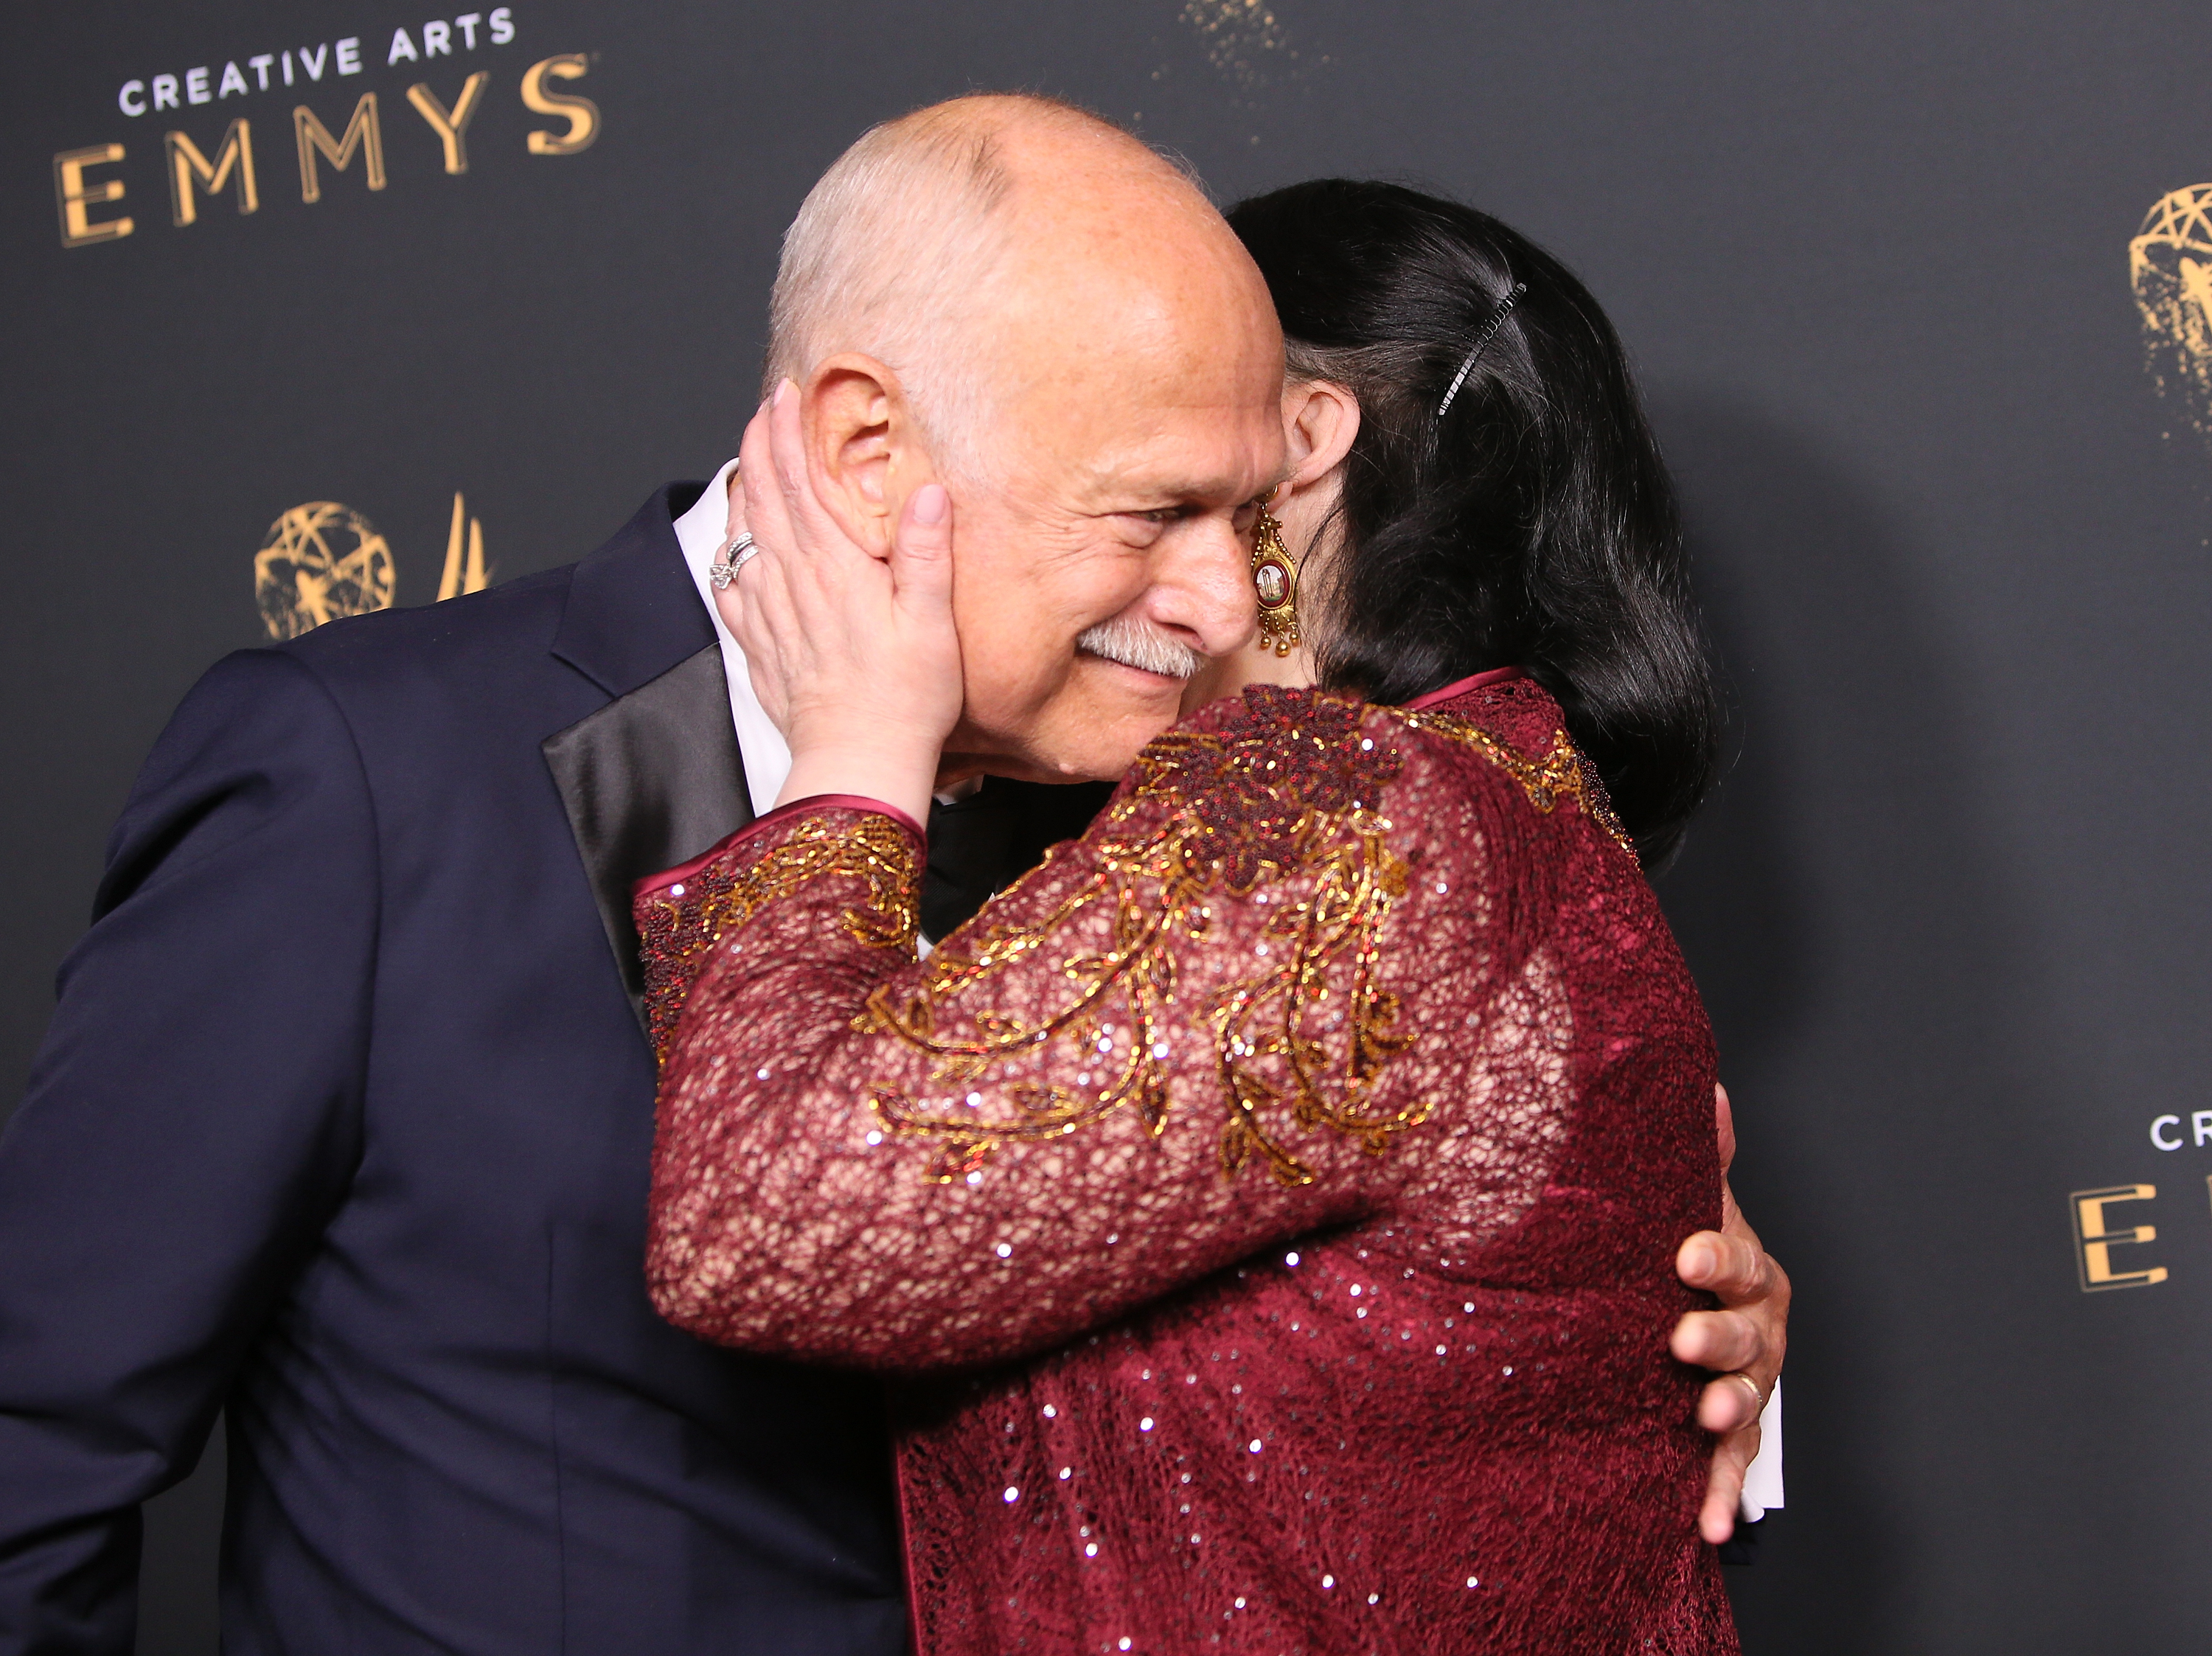 Gerald McRaney and Delta Burke at the at the 2017 Creative Arts Emmy Awards on September 10, 2017, in Los Angeles, California | Source: Getty Images